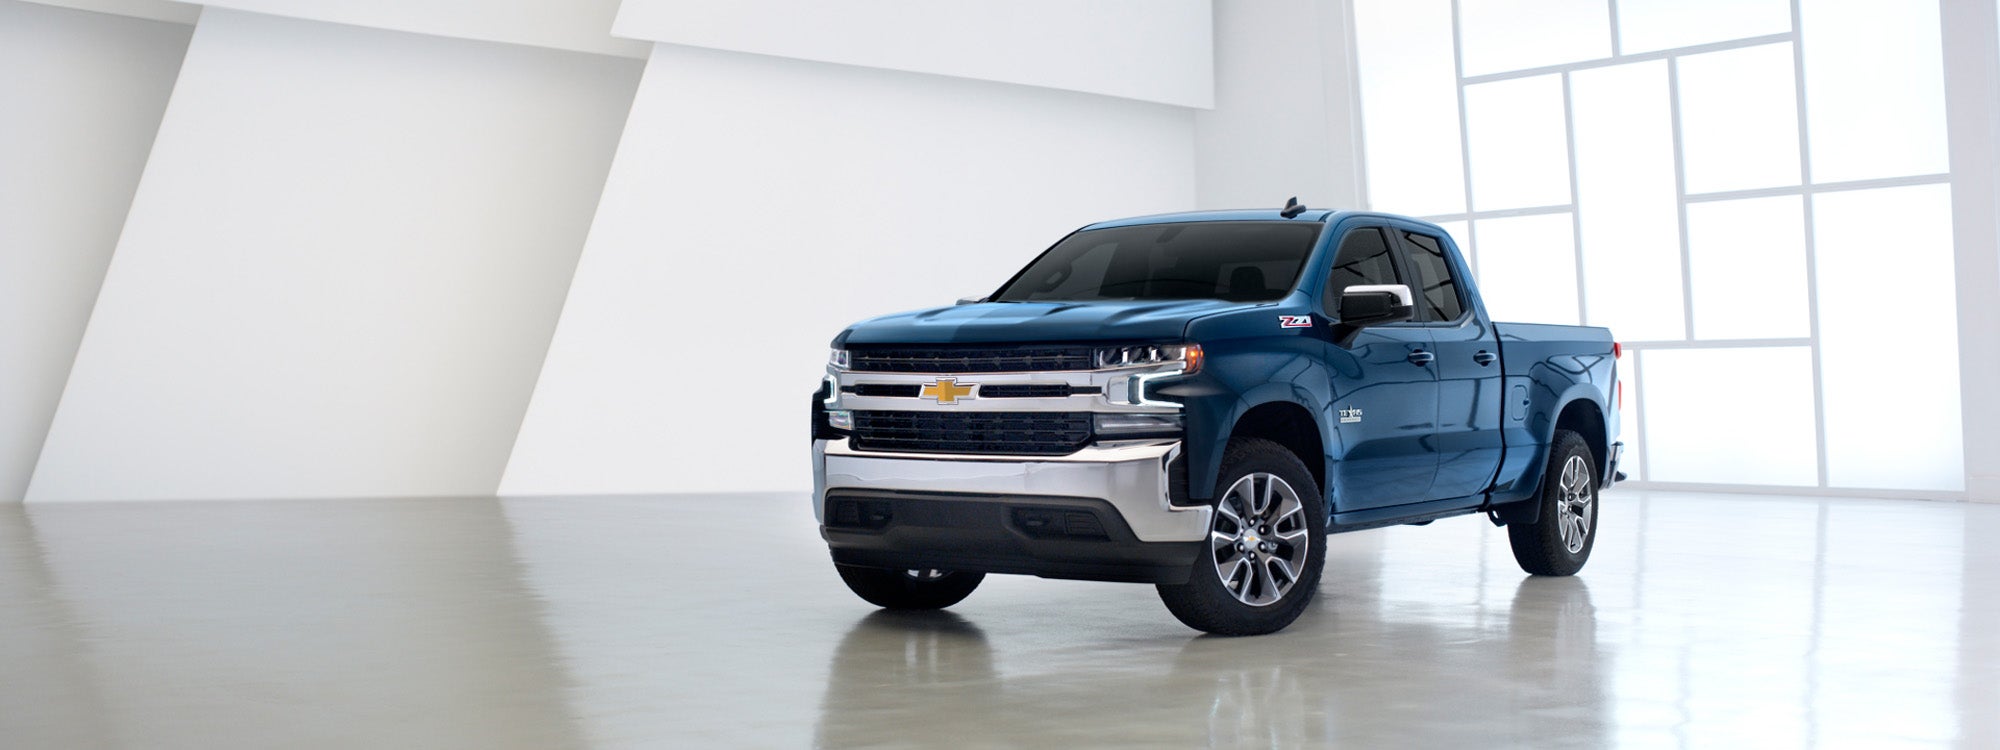 Best Years For Chevy Silverado 1500